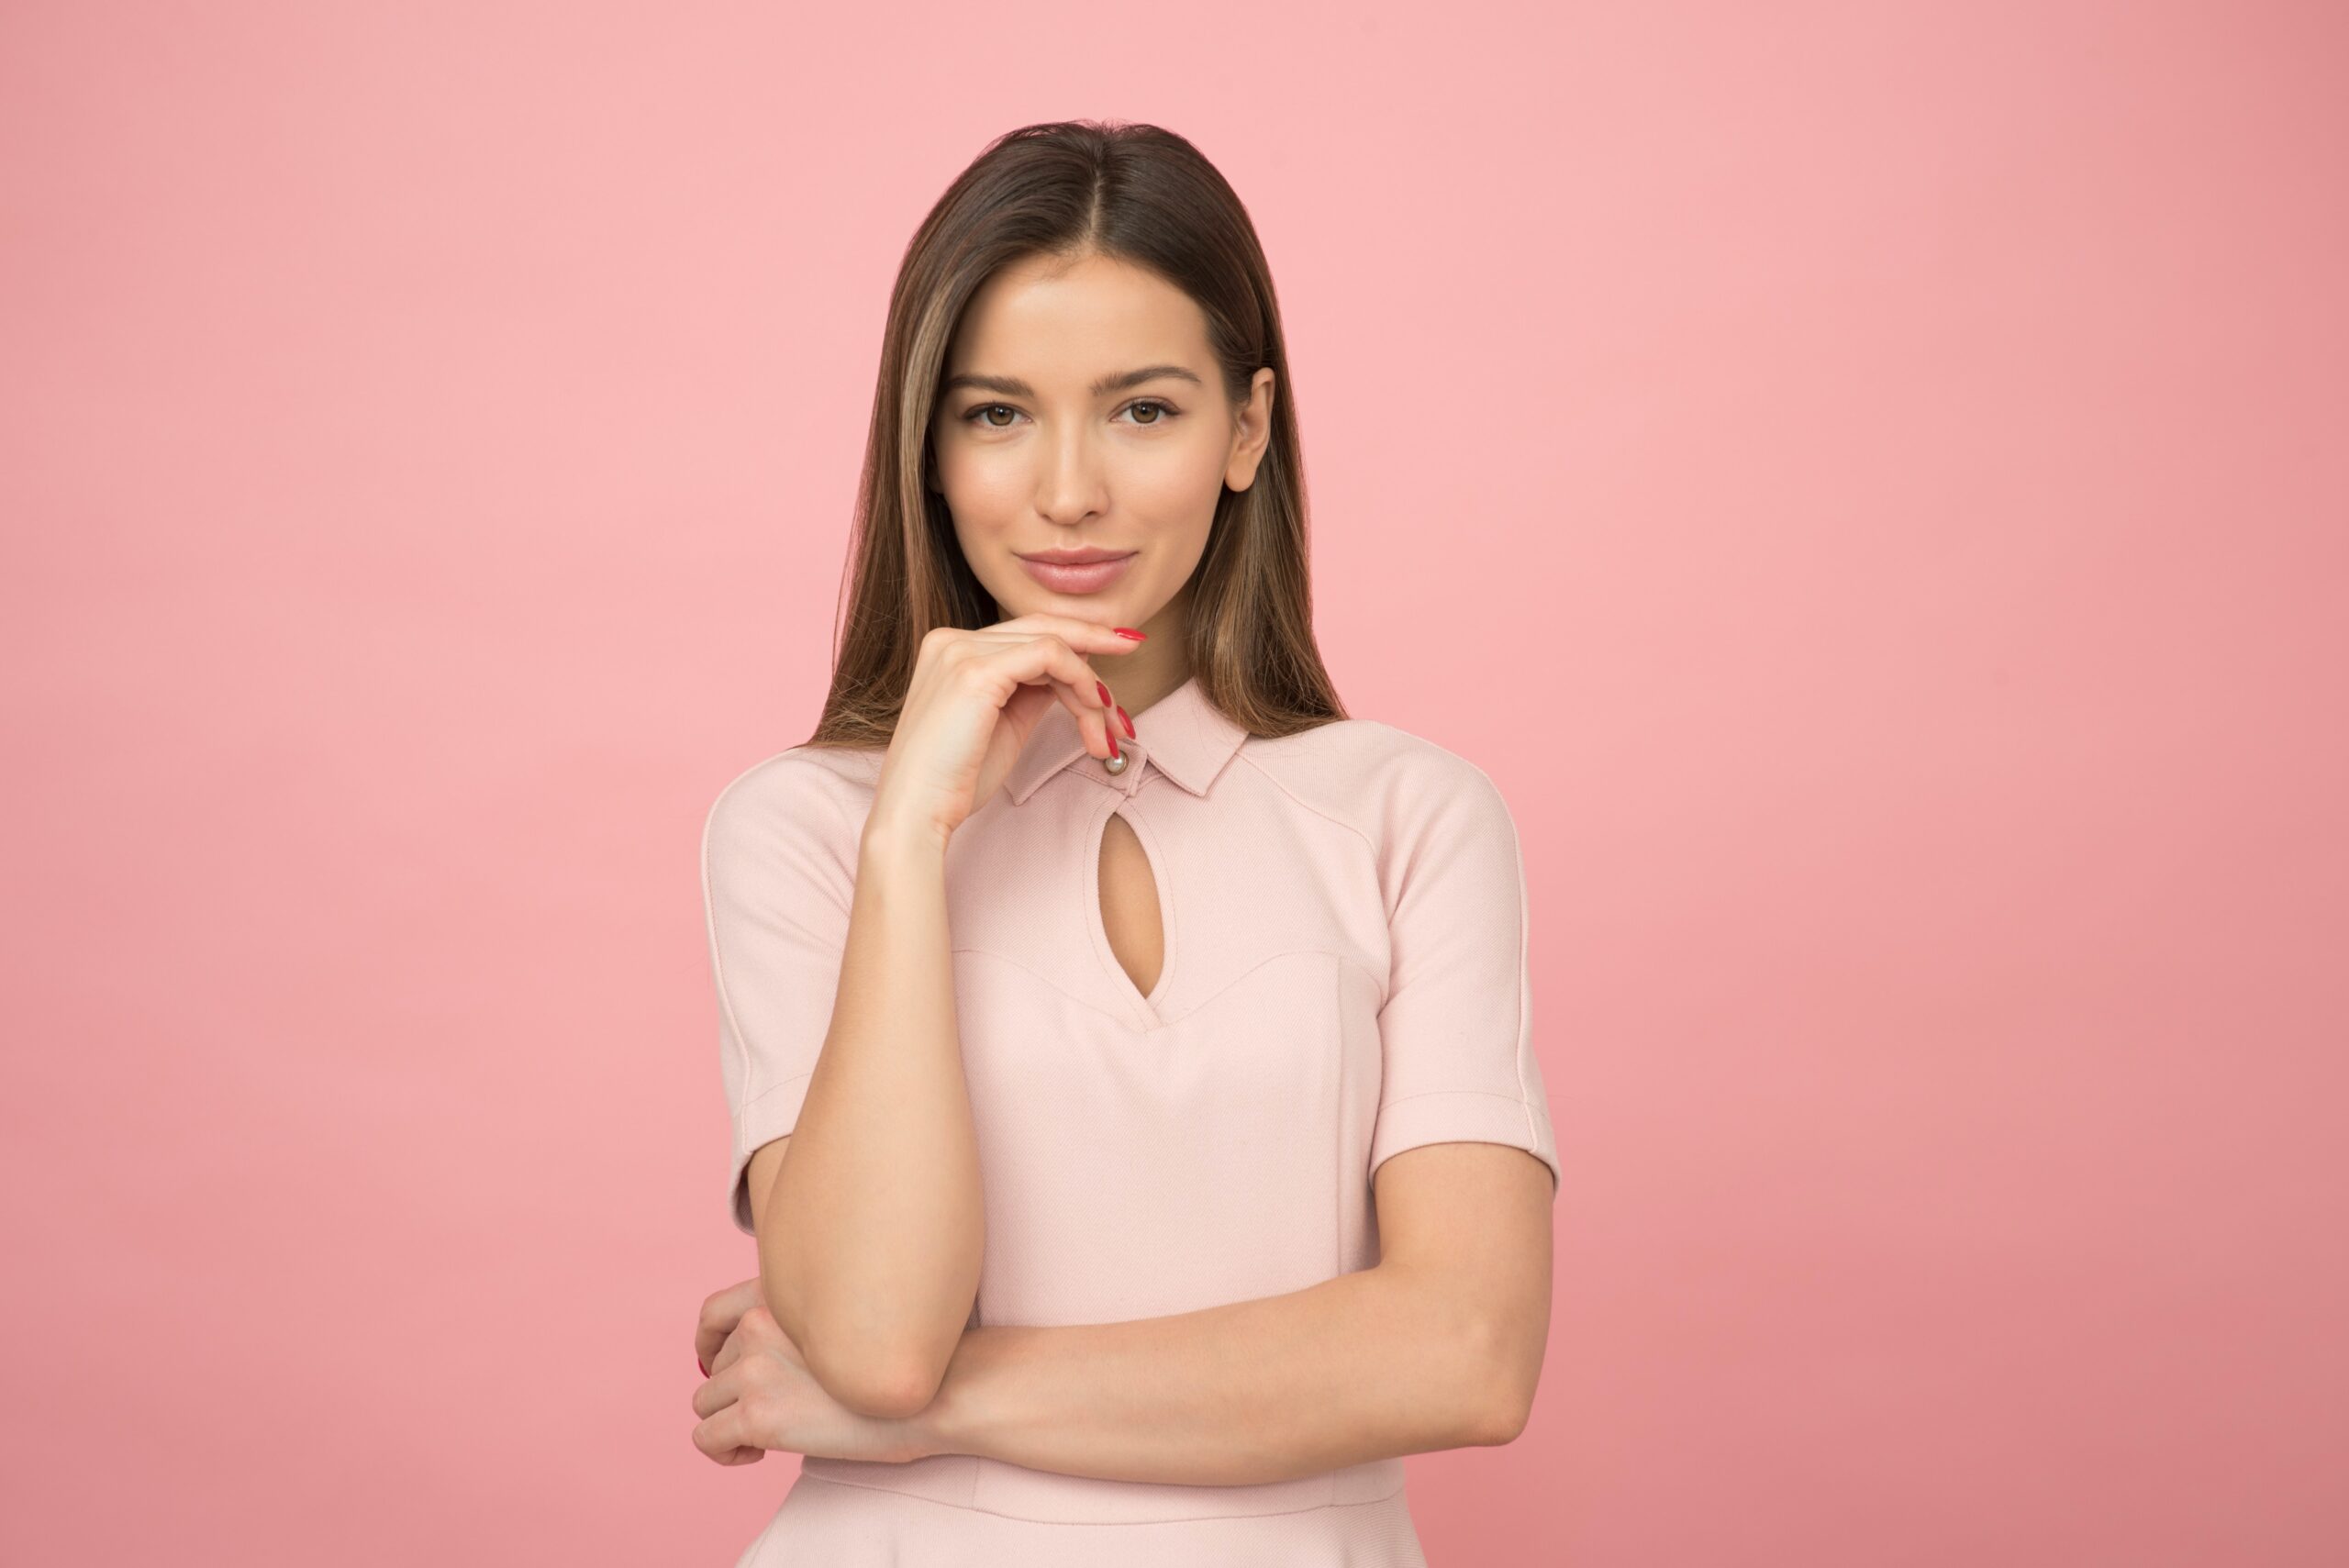 business woman standing against pink background